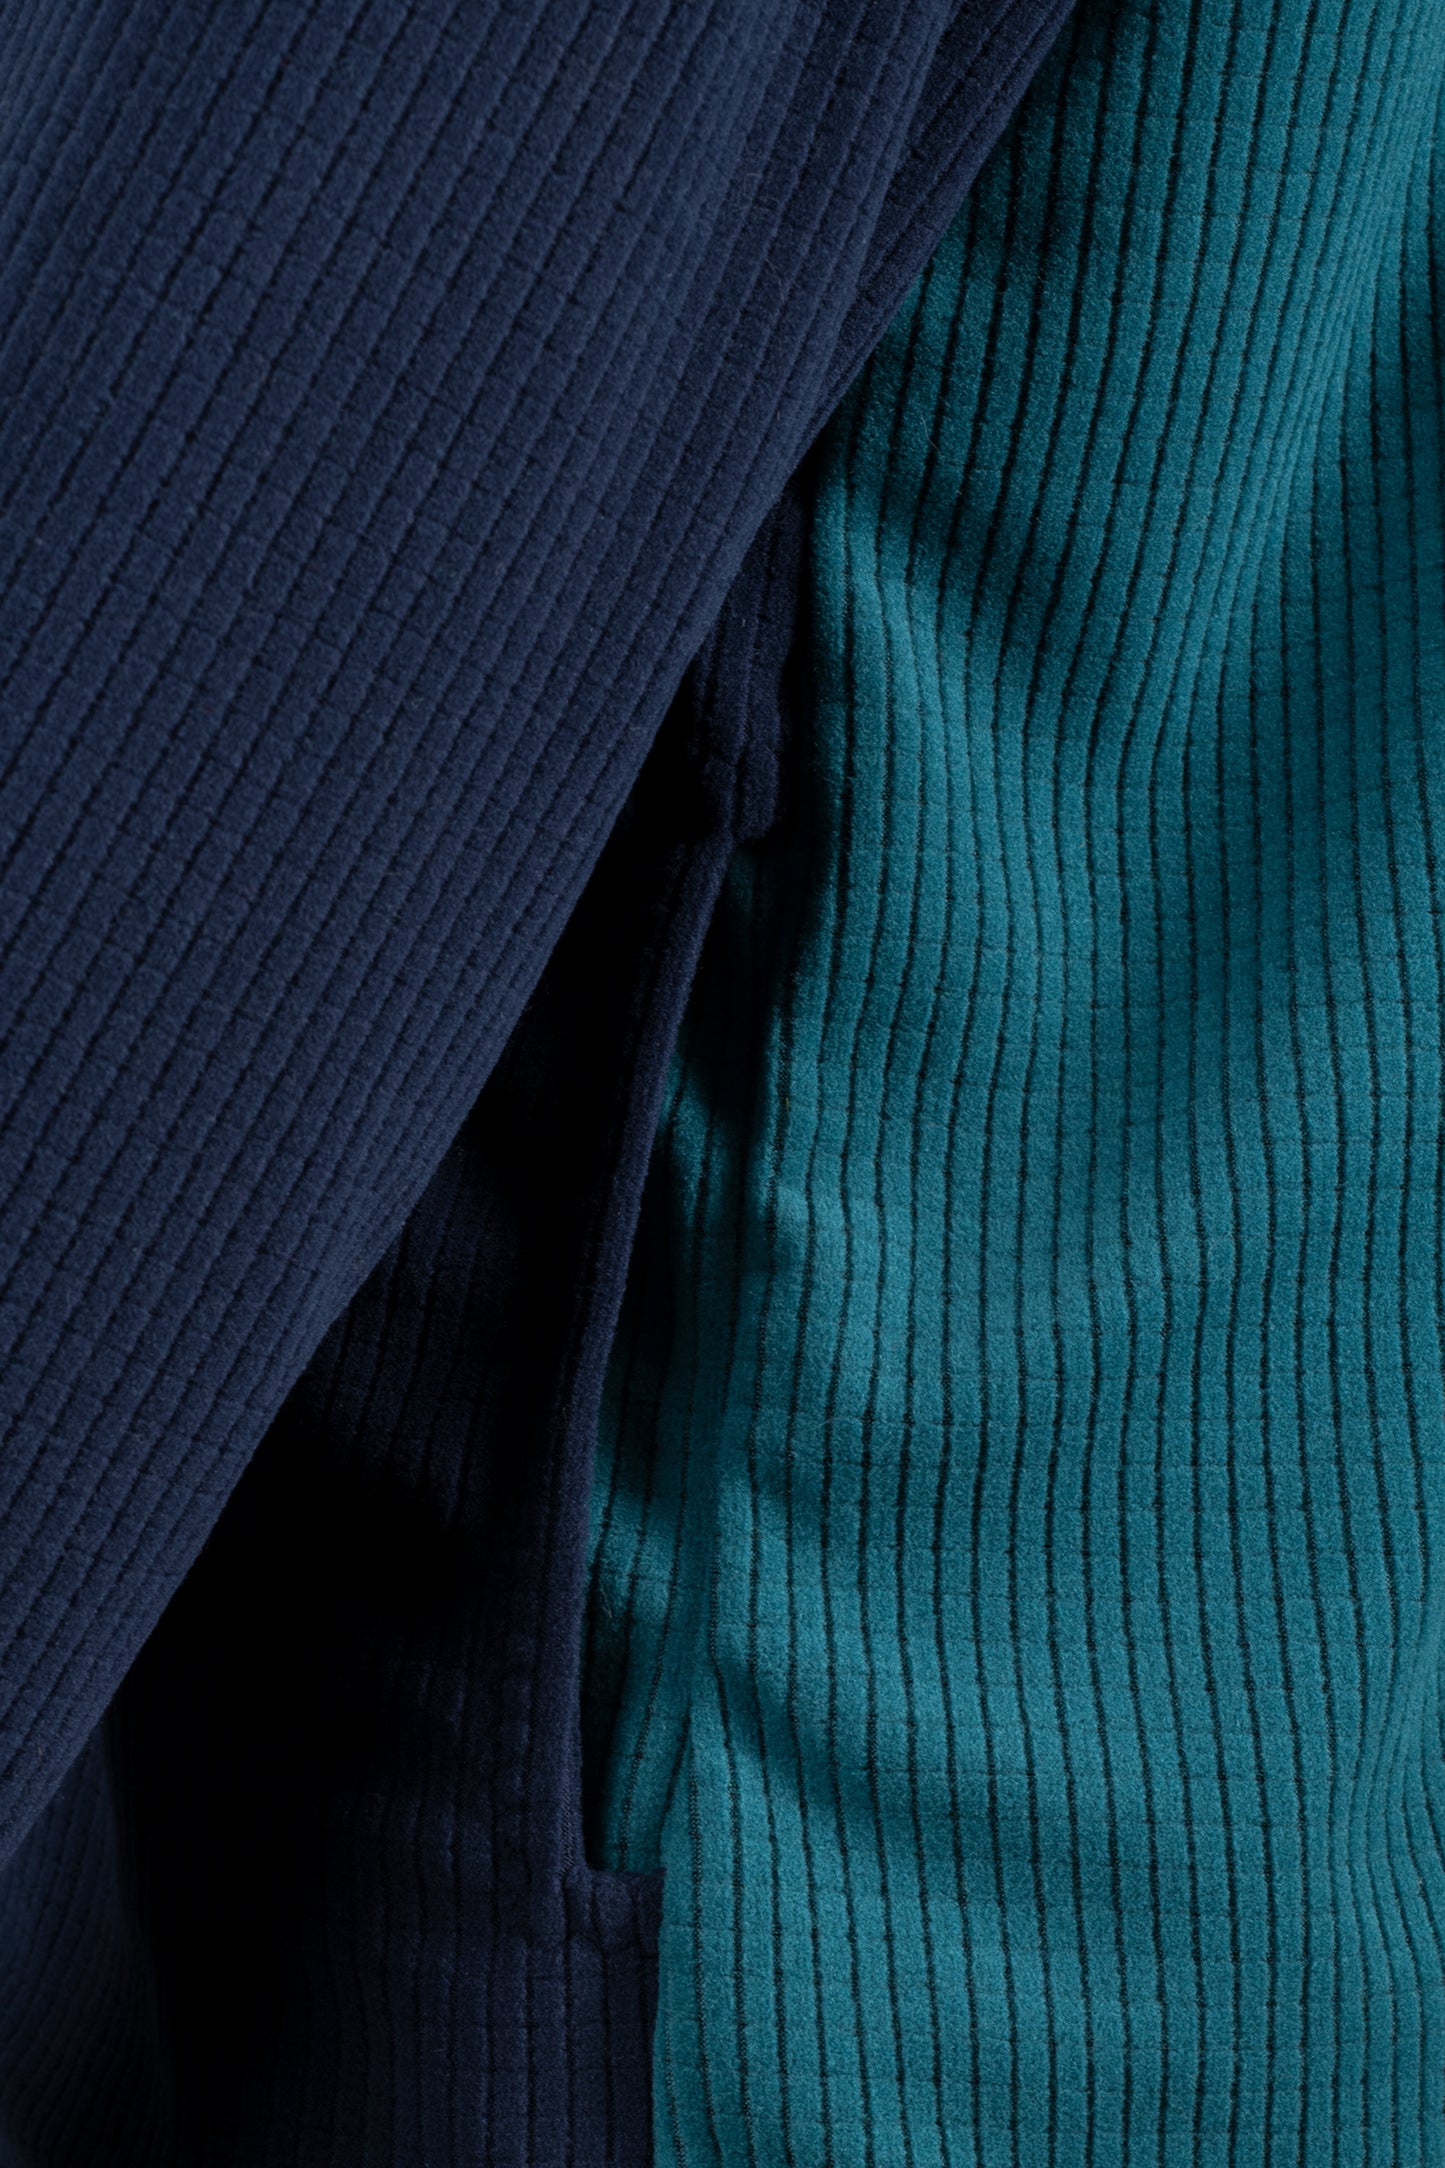 Small Batch Series #1: Navy and Teal